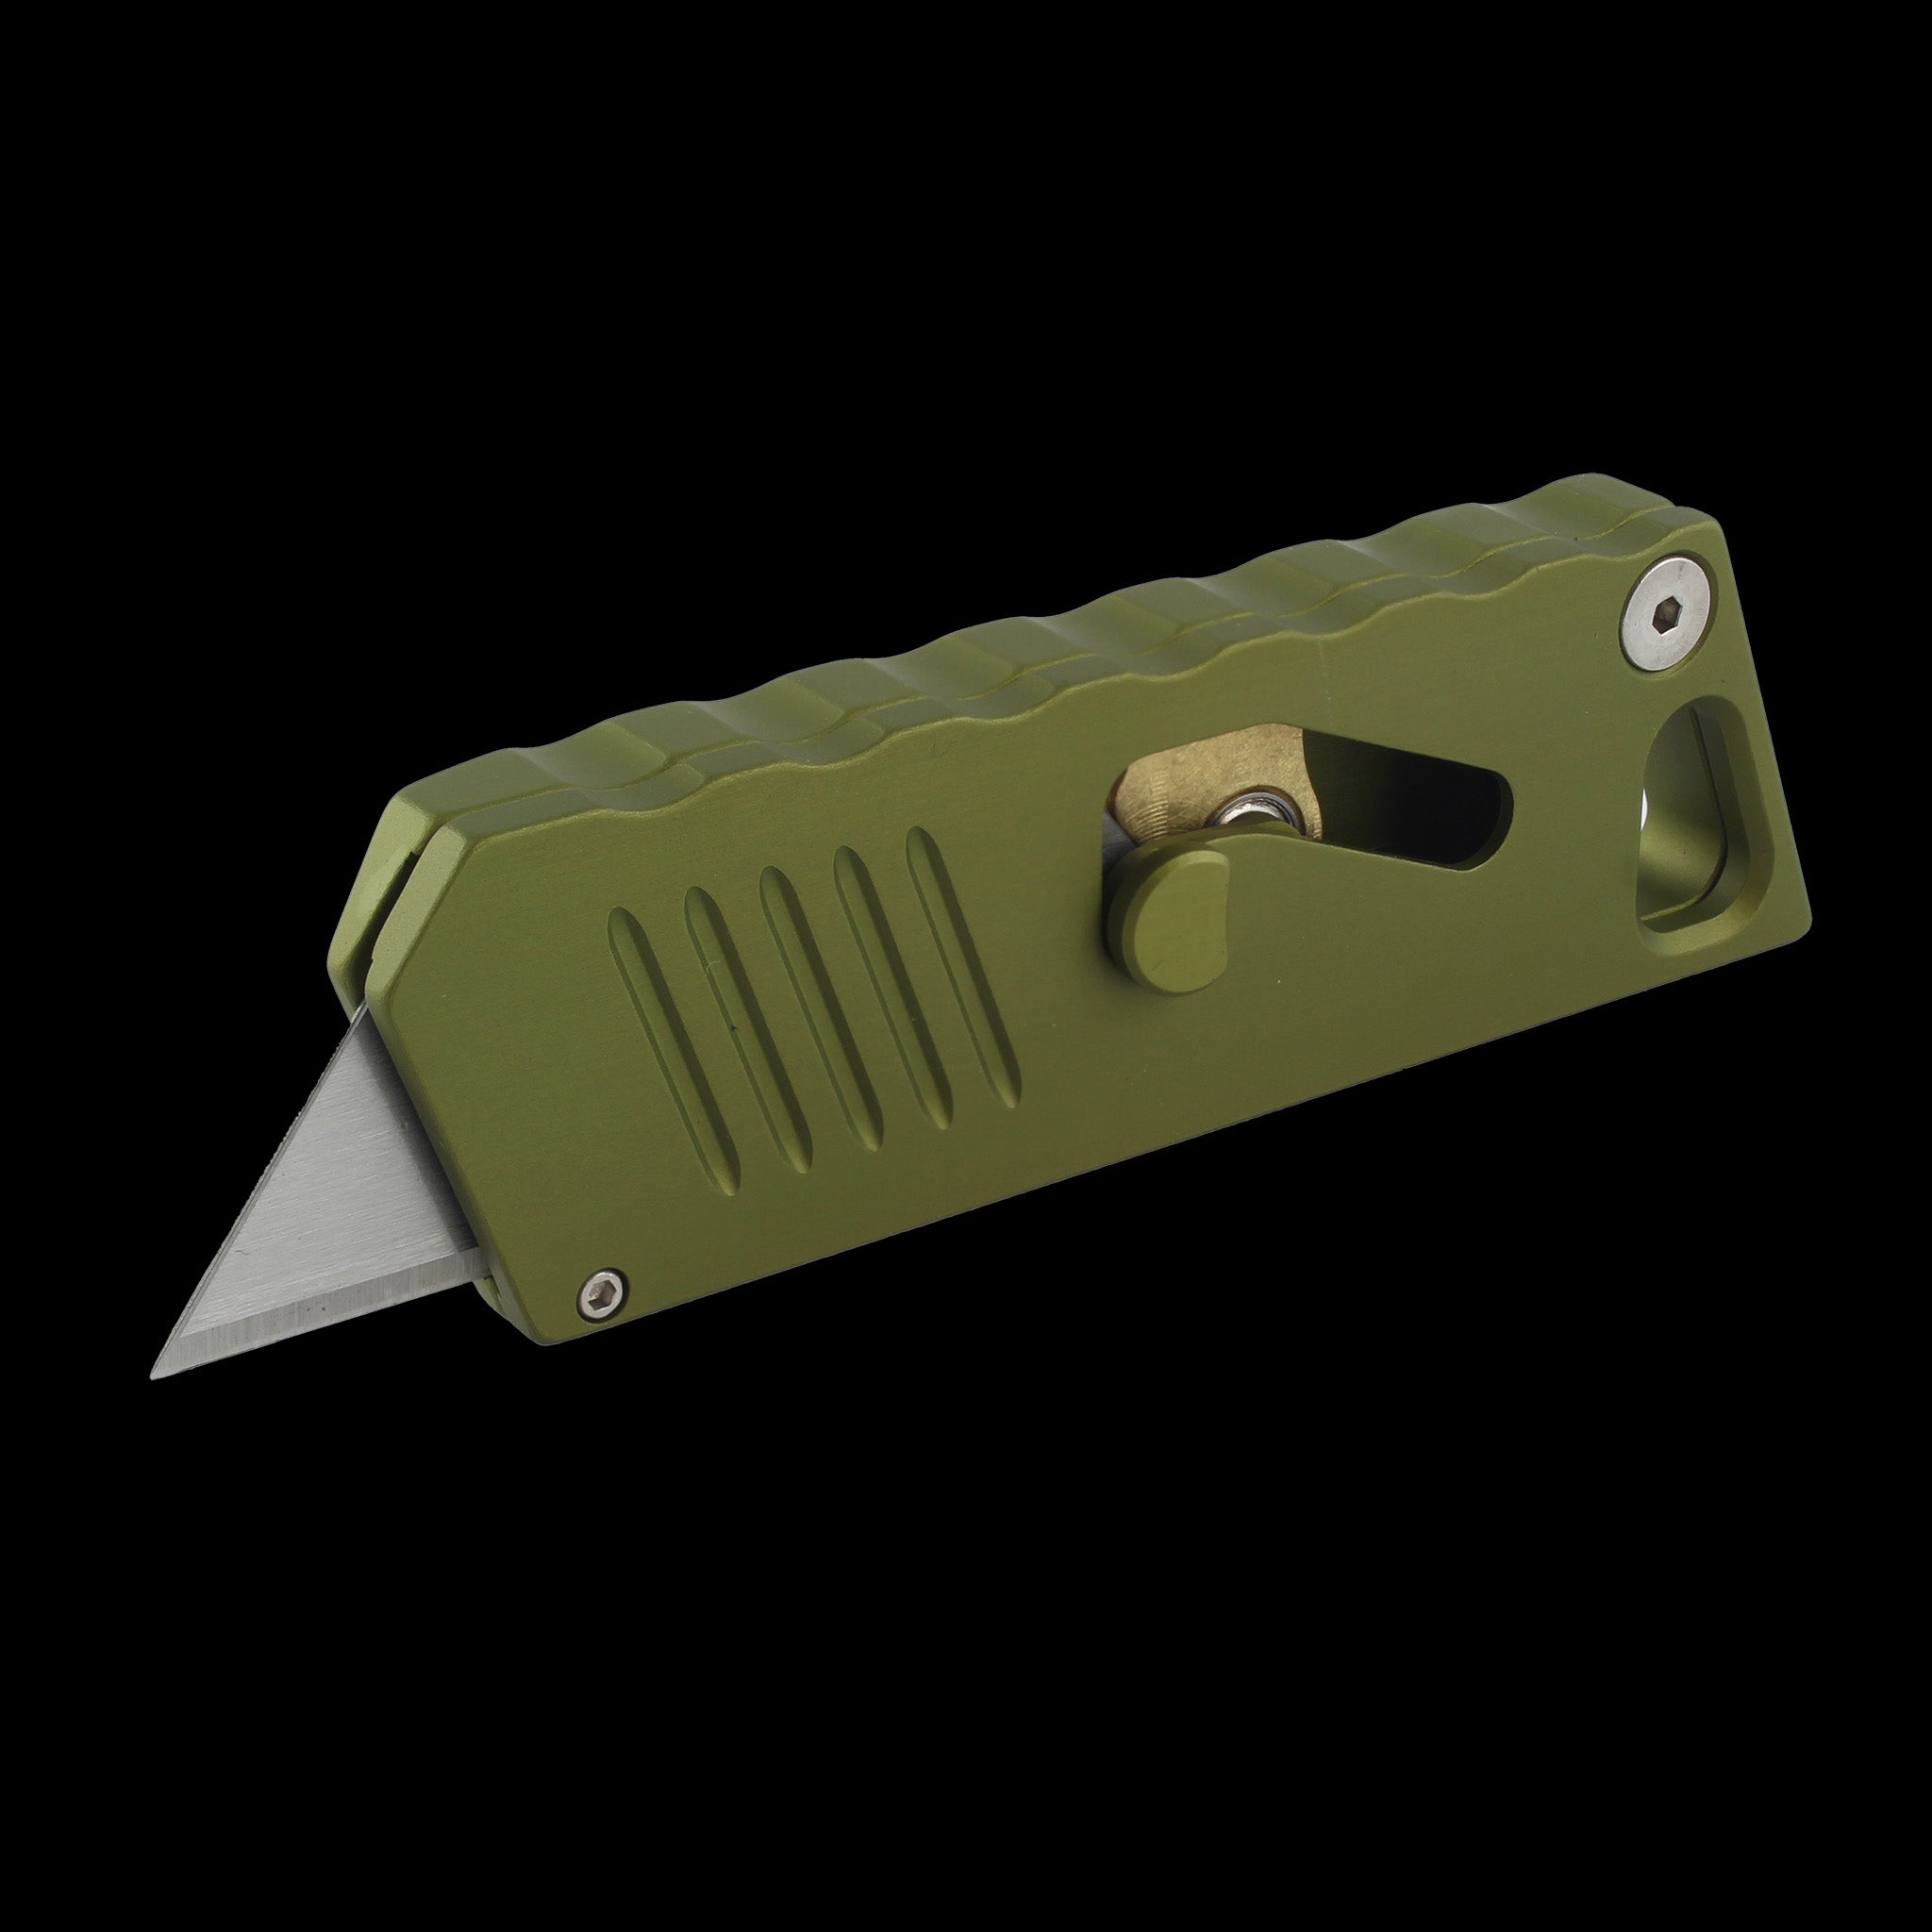 bob the boxcutter in olive green